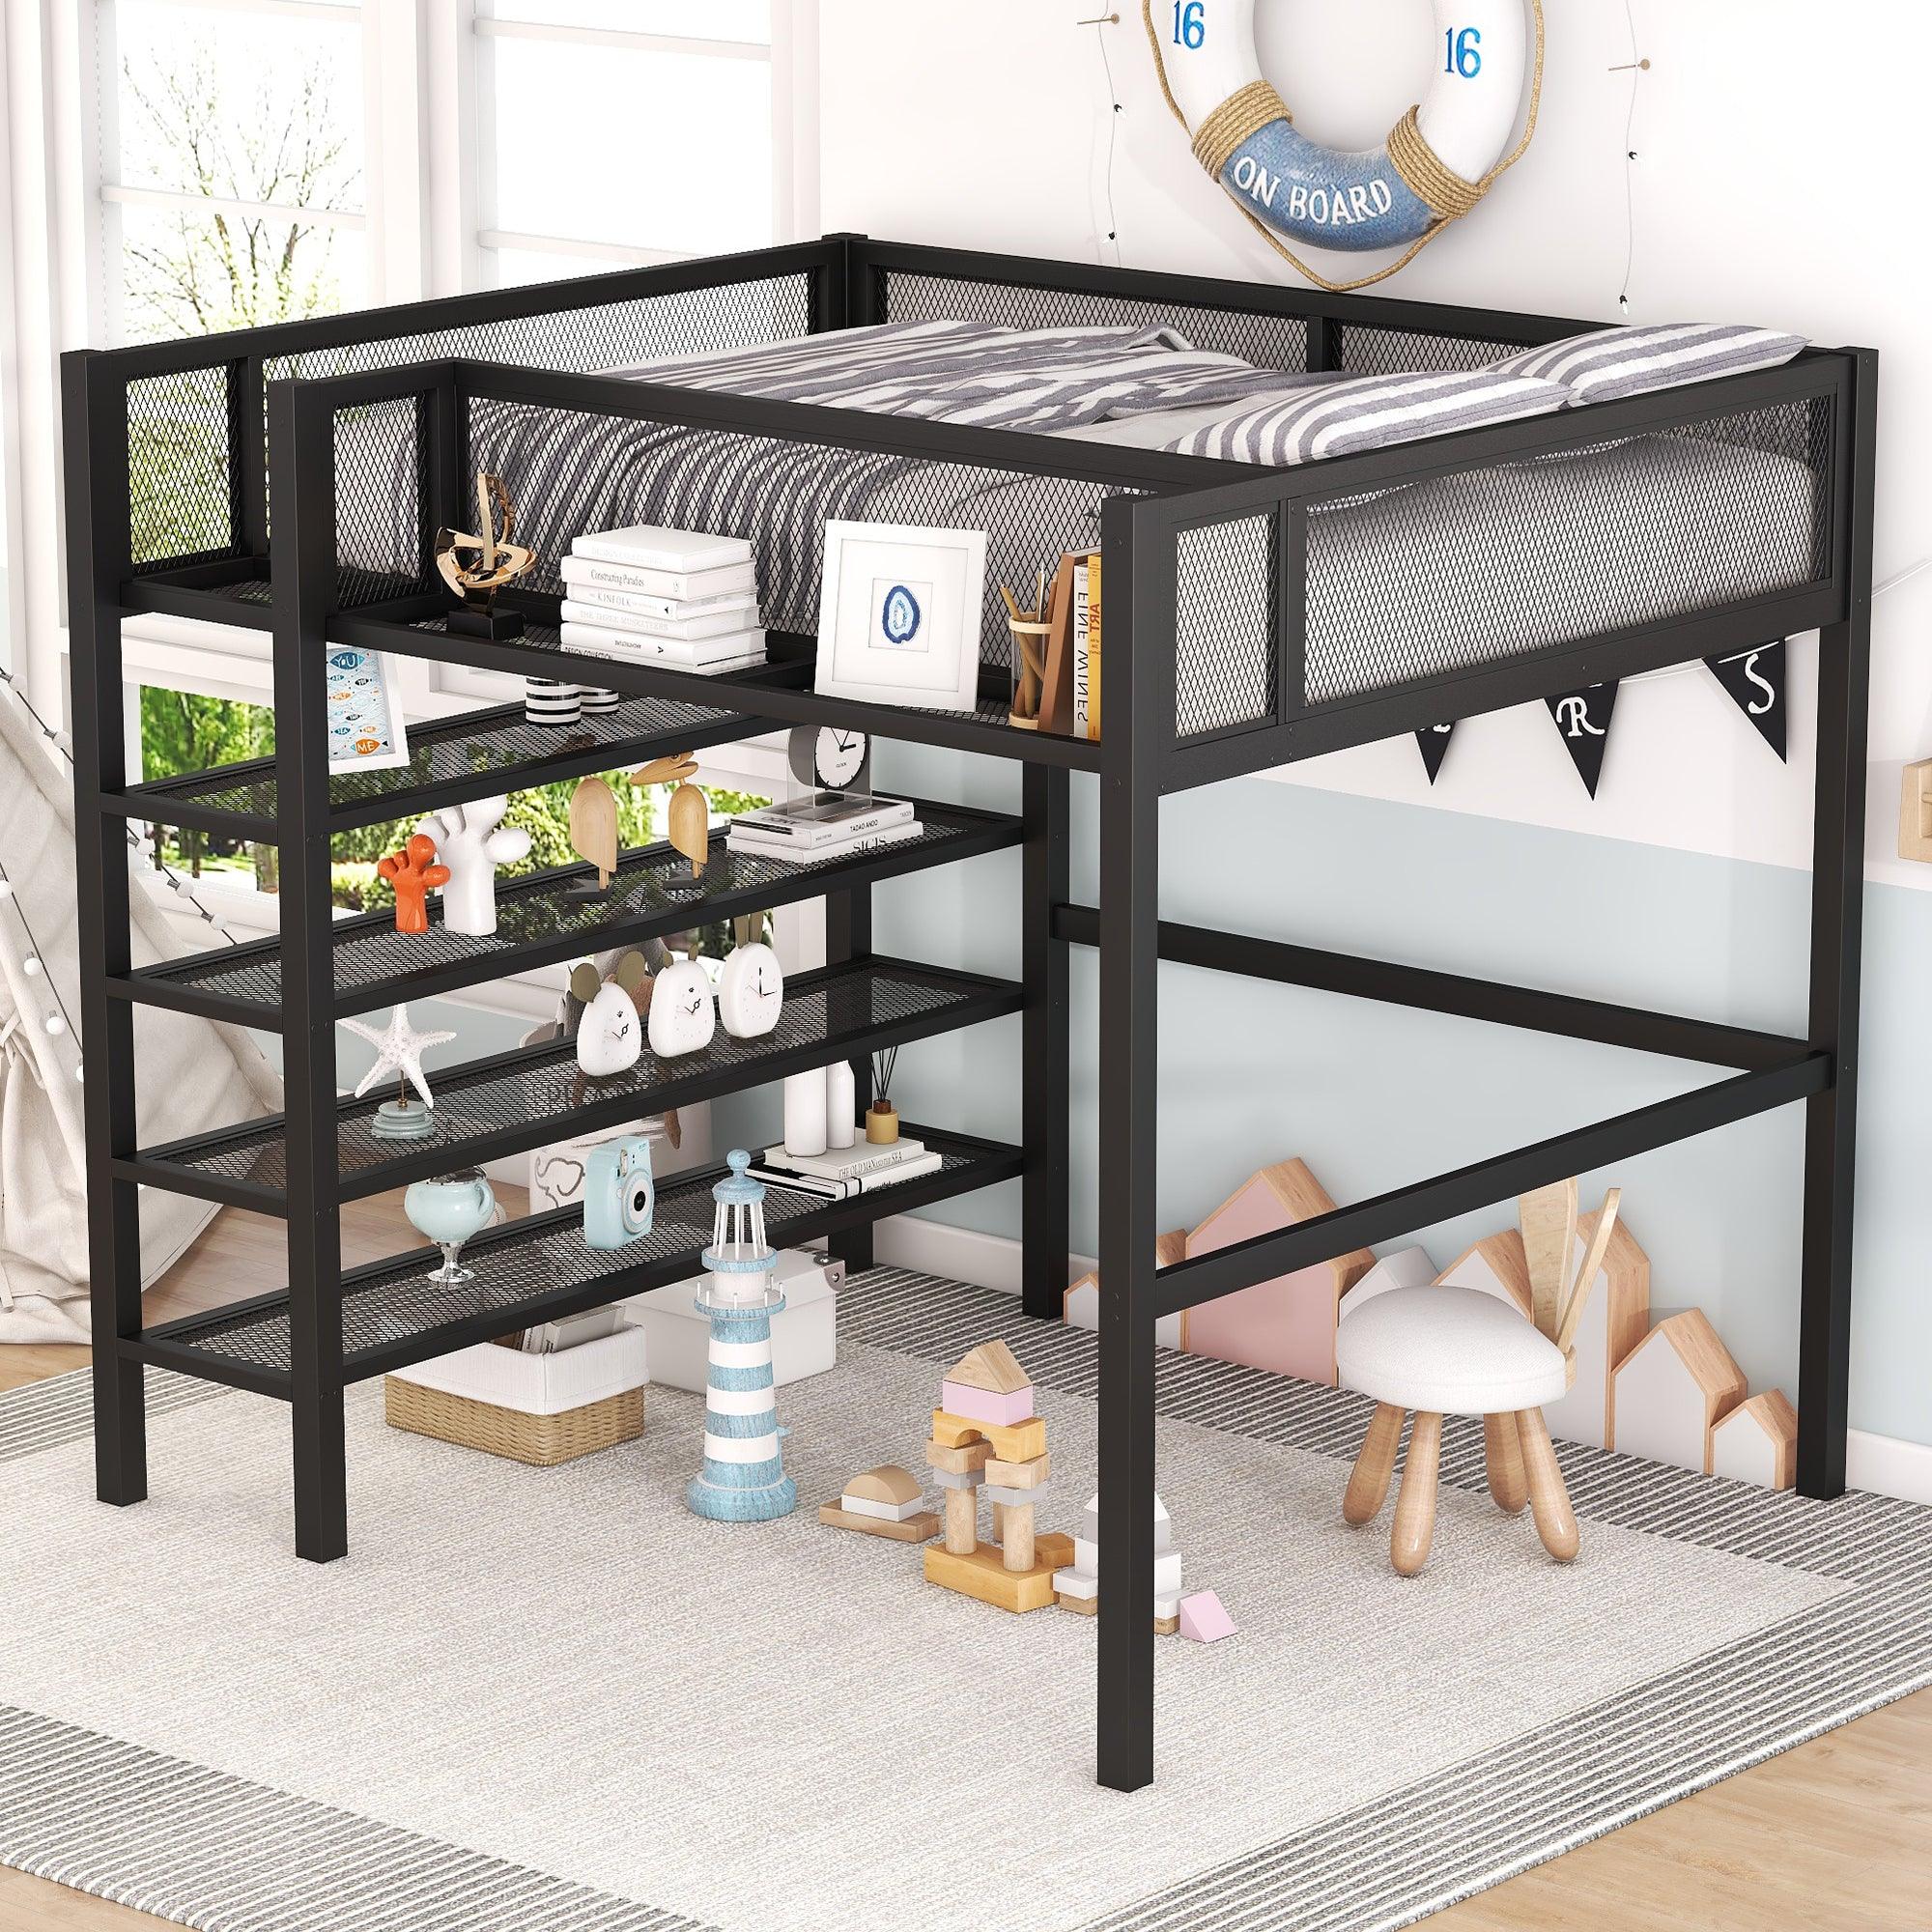 🆓🚛 Full Size Metal Loft Bed With 4-Tier Shelves and Storage, Black